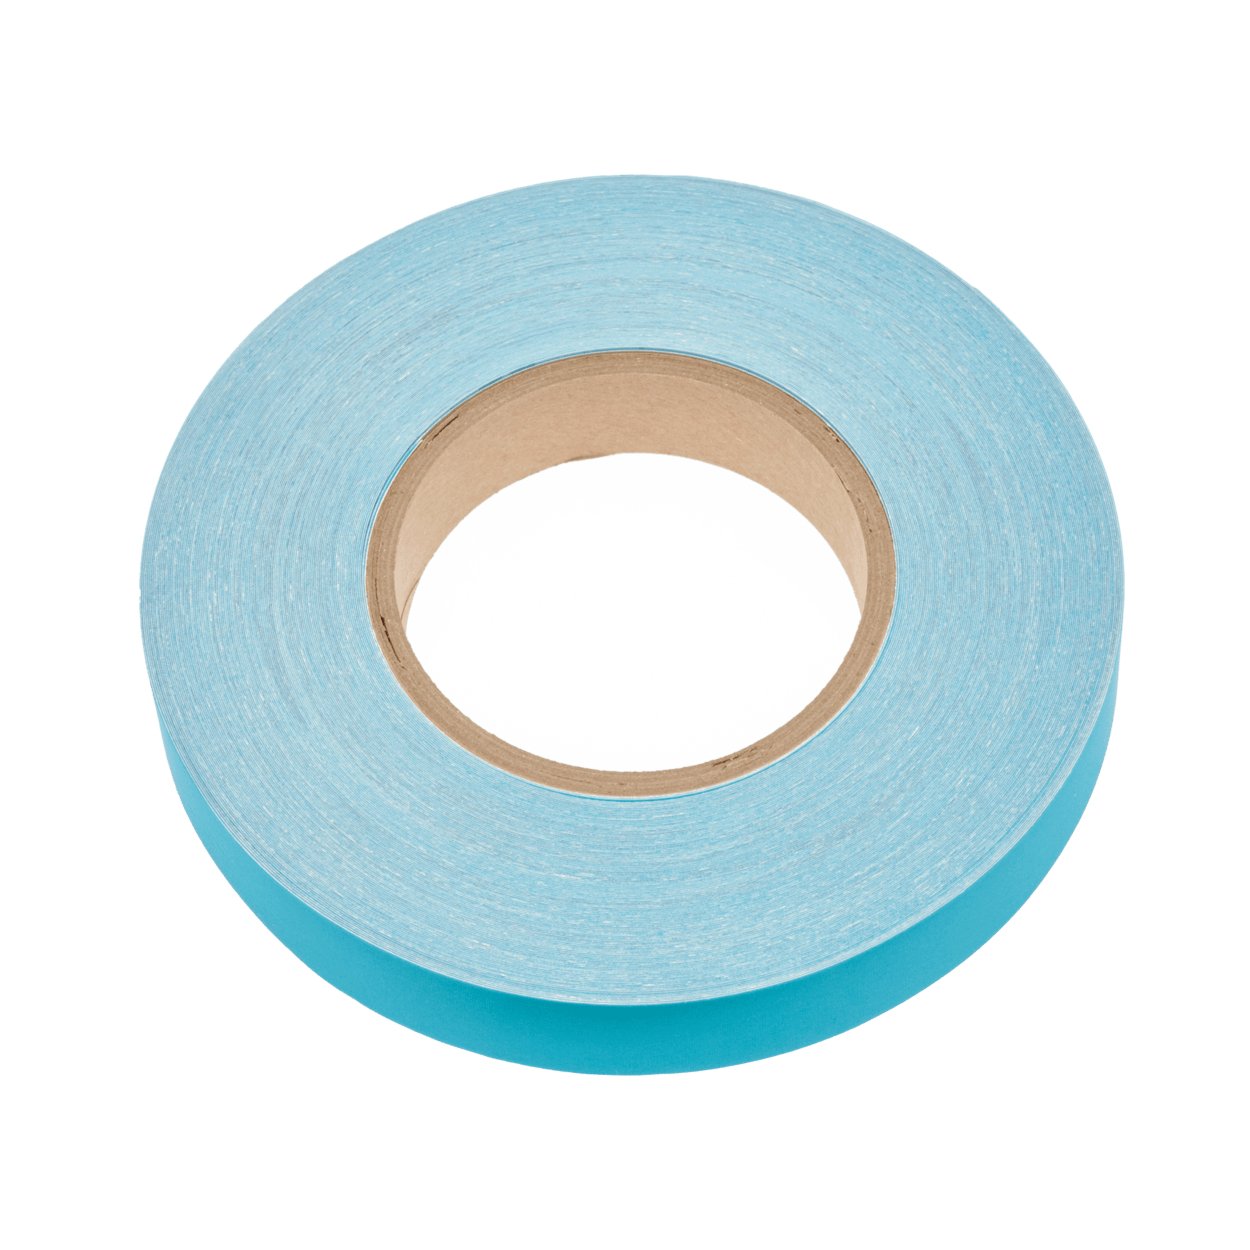 Duotone Kite Spare/Wing Spare rep. insignia Tape 24mm (SS20-onw) 2025 - Worthing Watersports - 9008415925858 - Spareparts - Duotone Kiteboarding